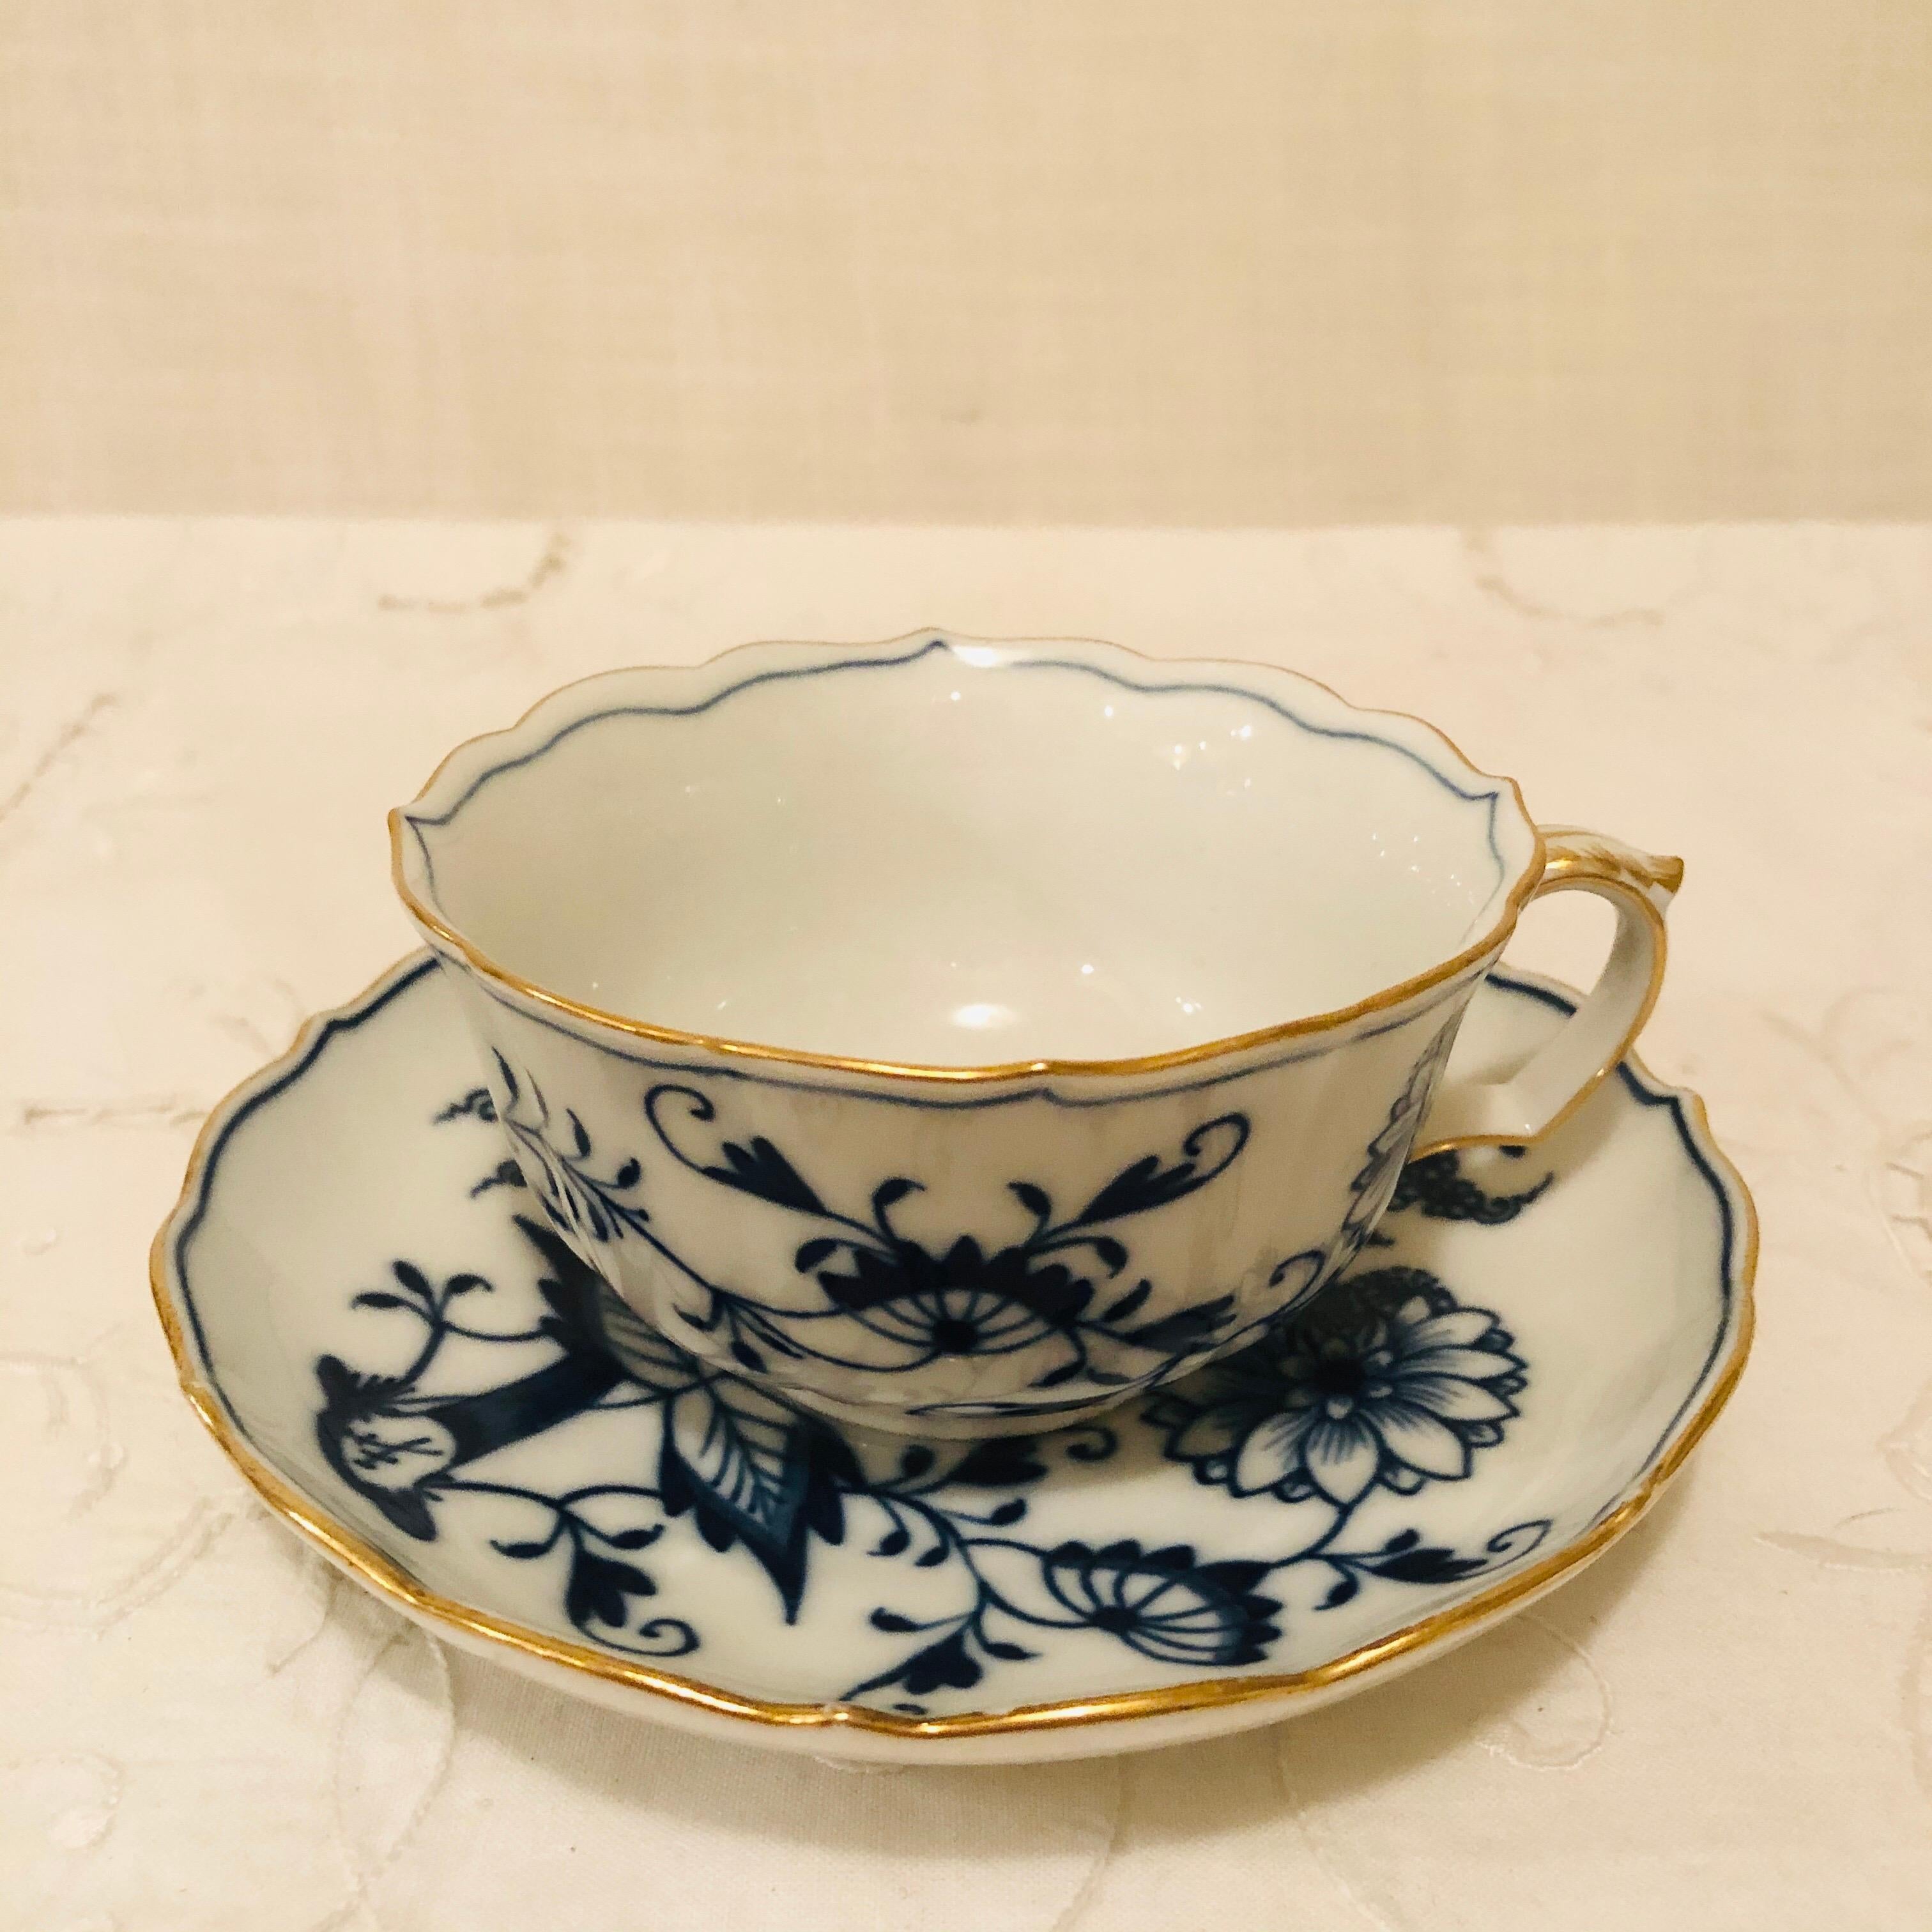 We have a set of Meissen blue onion teacups and saucers with a gold rim to present to you. They would be lovely to use for afternoon or high tea. They were made from 1923-1933. Their gold rim around the top and the base of the cup and around the rim